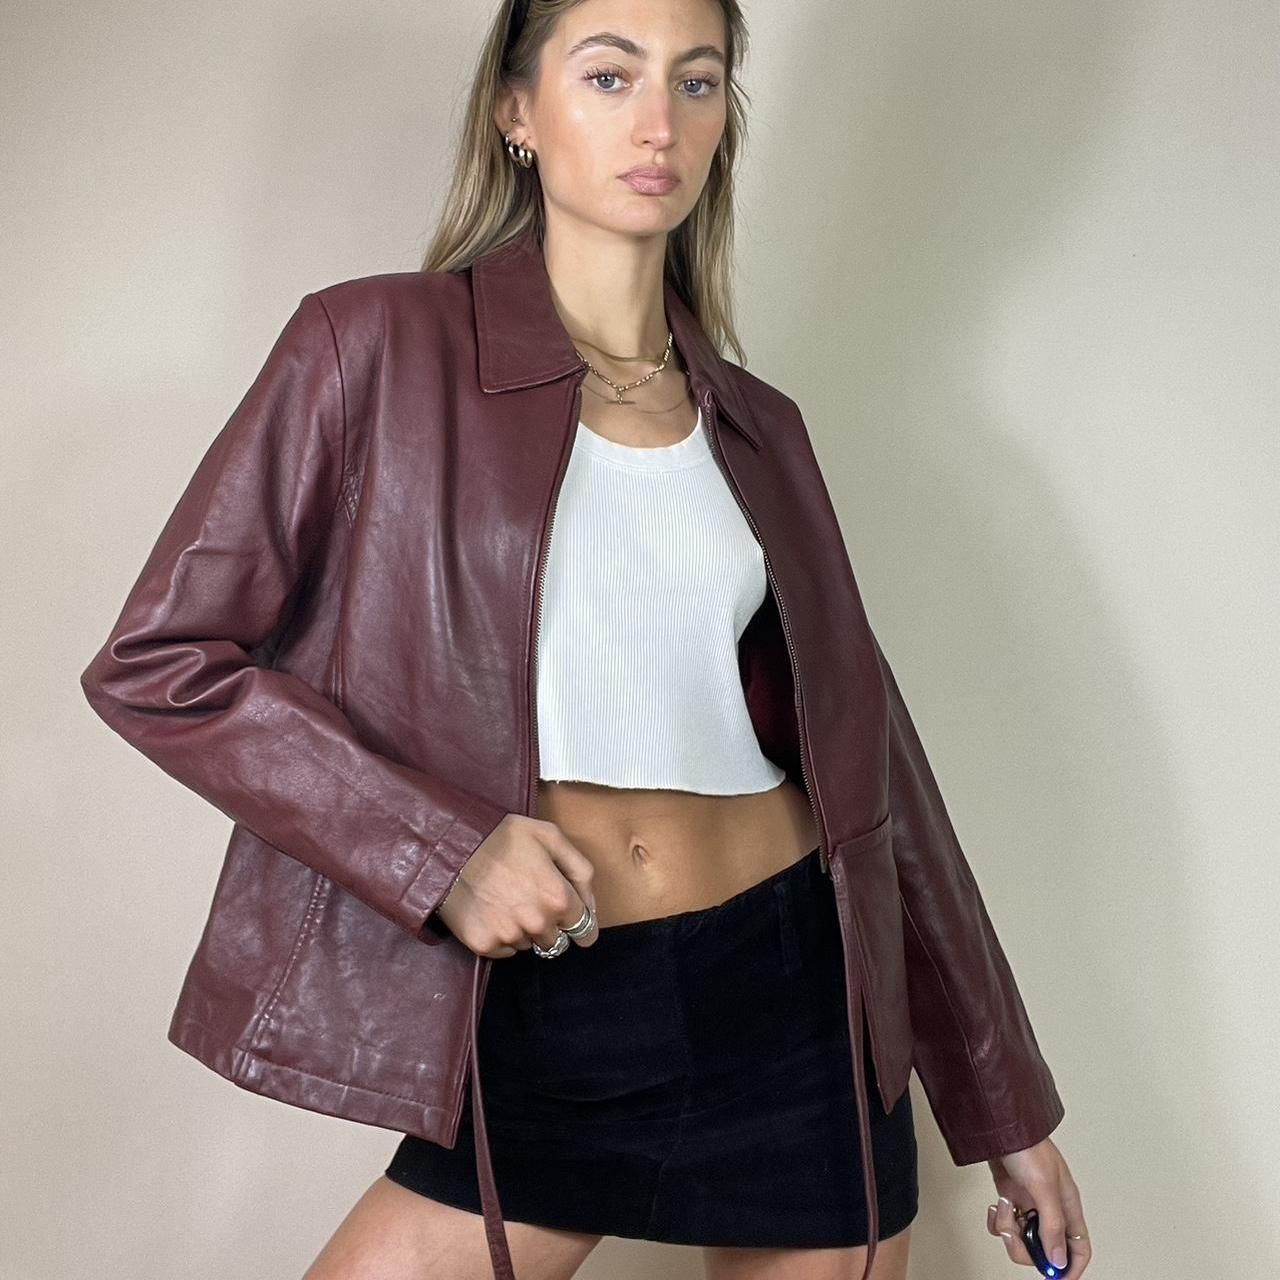 Burgundy Leather Jacket Outfit
  Ideas for Women